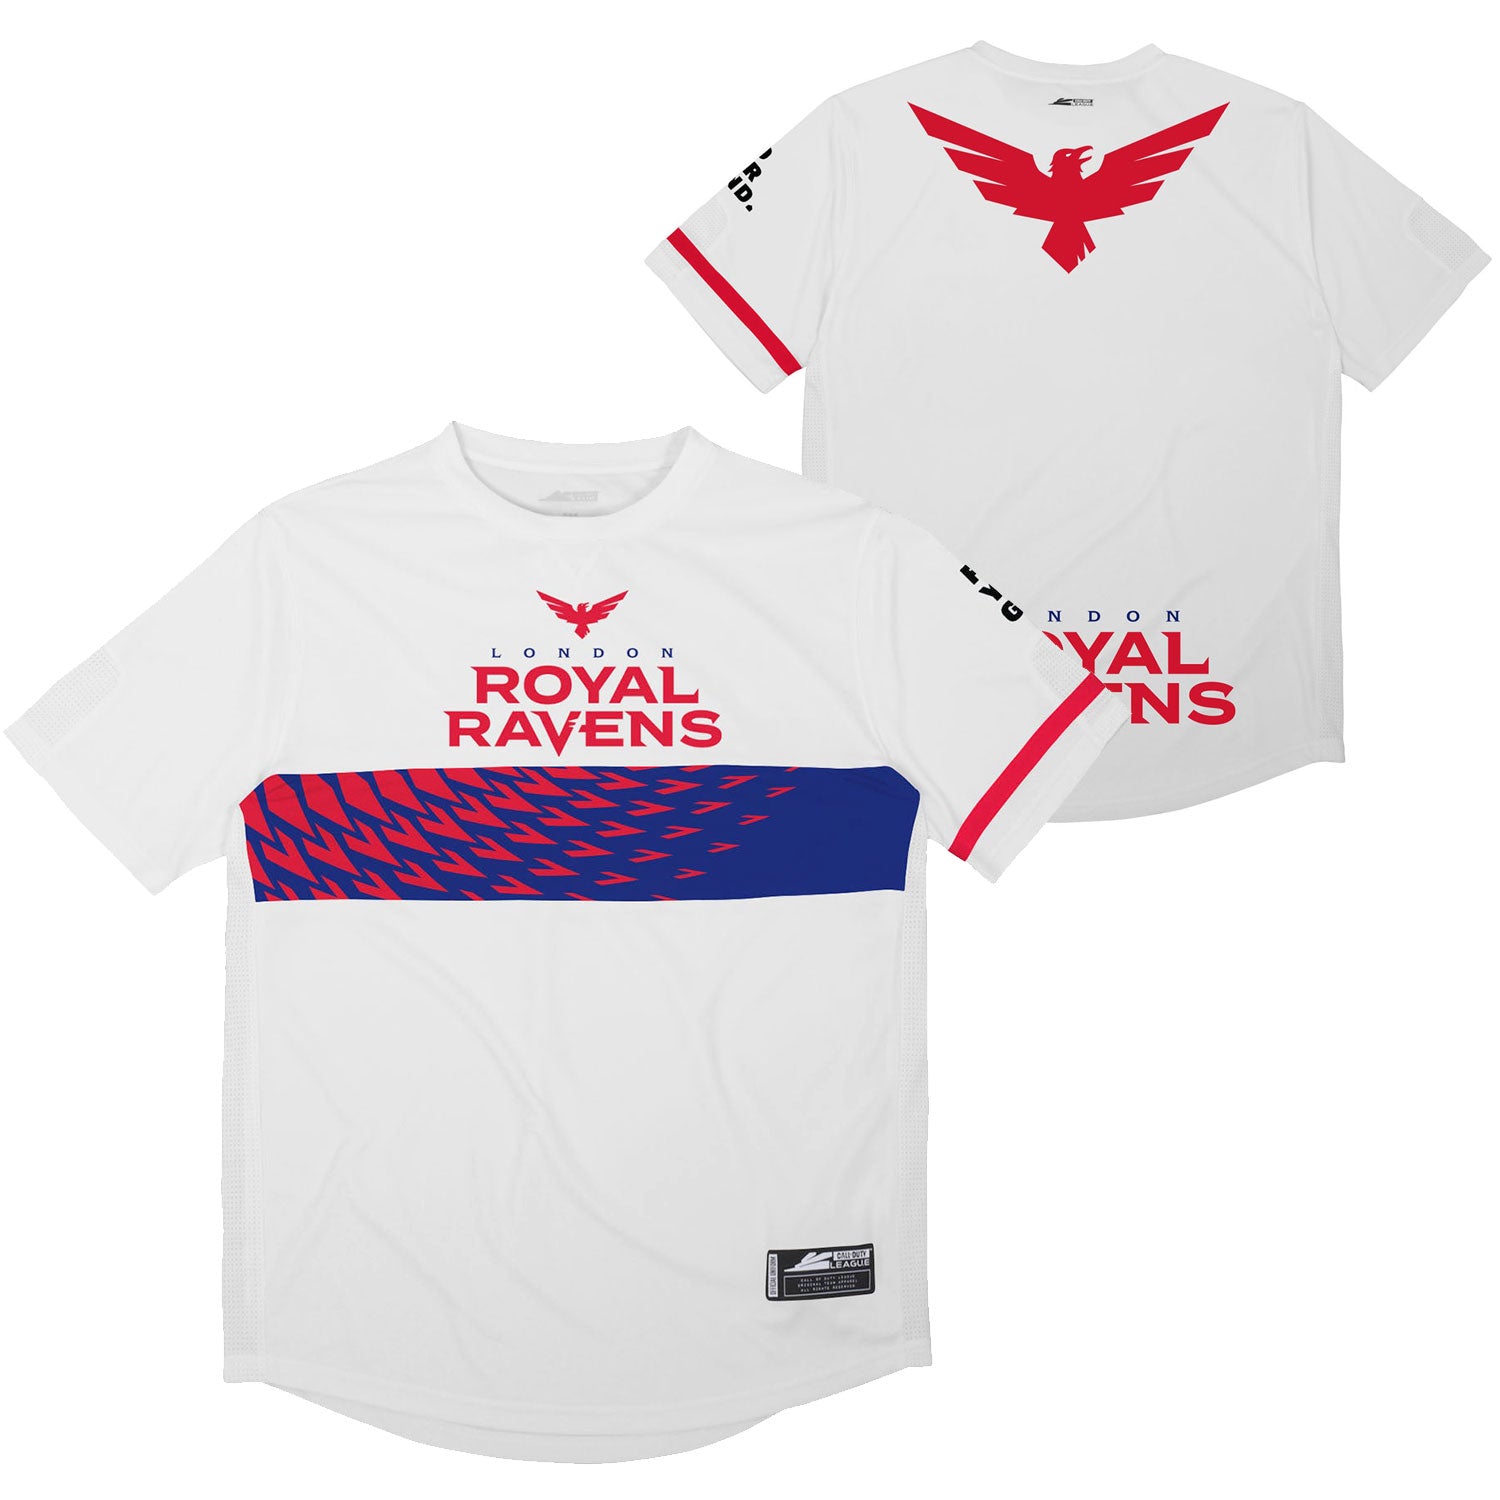 London Royal Ravens White Pro Jersey - front and back view